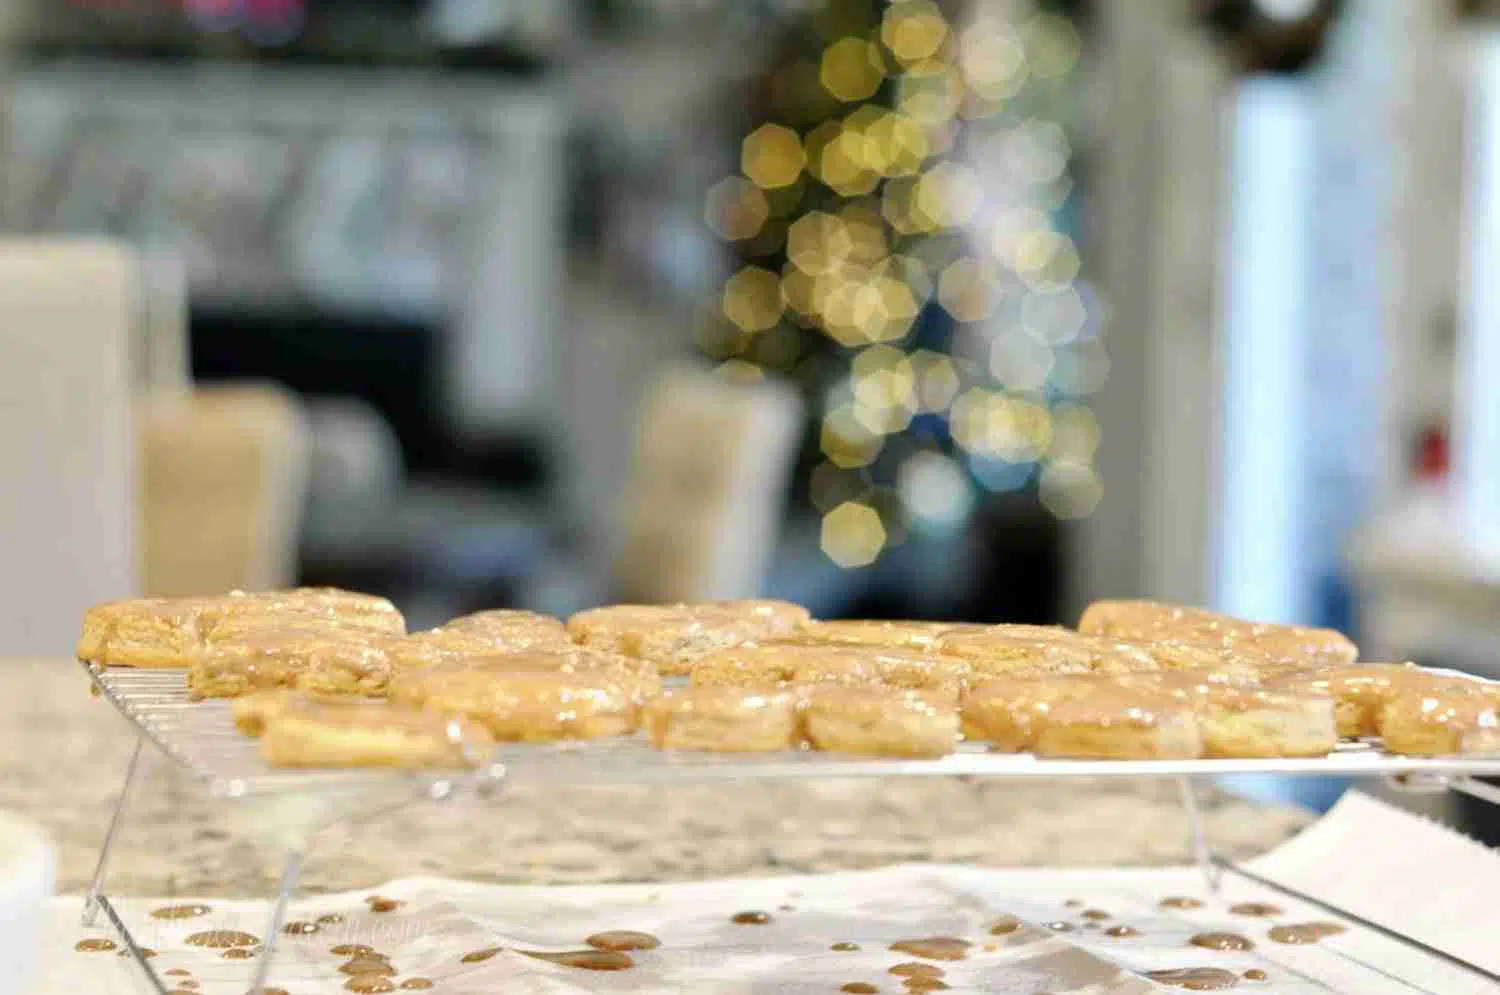 cookies cooling on a baking rack, with christmas tree in background.